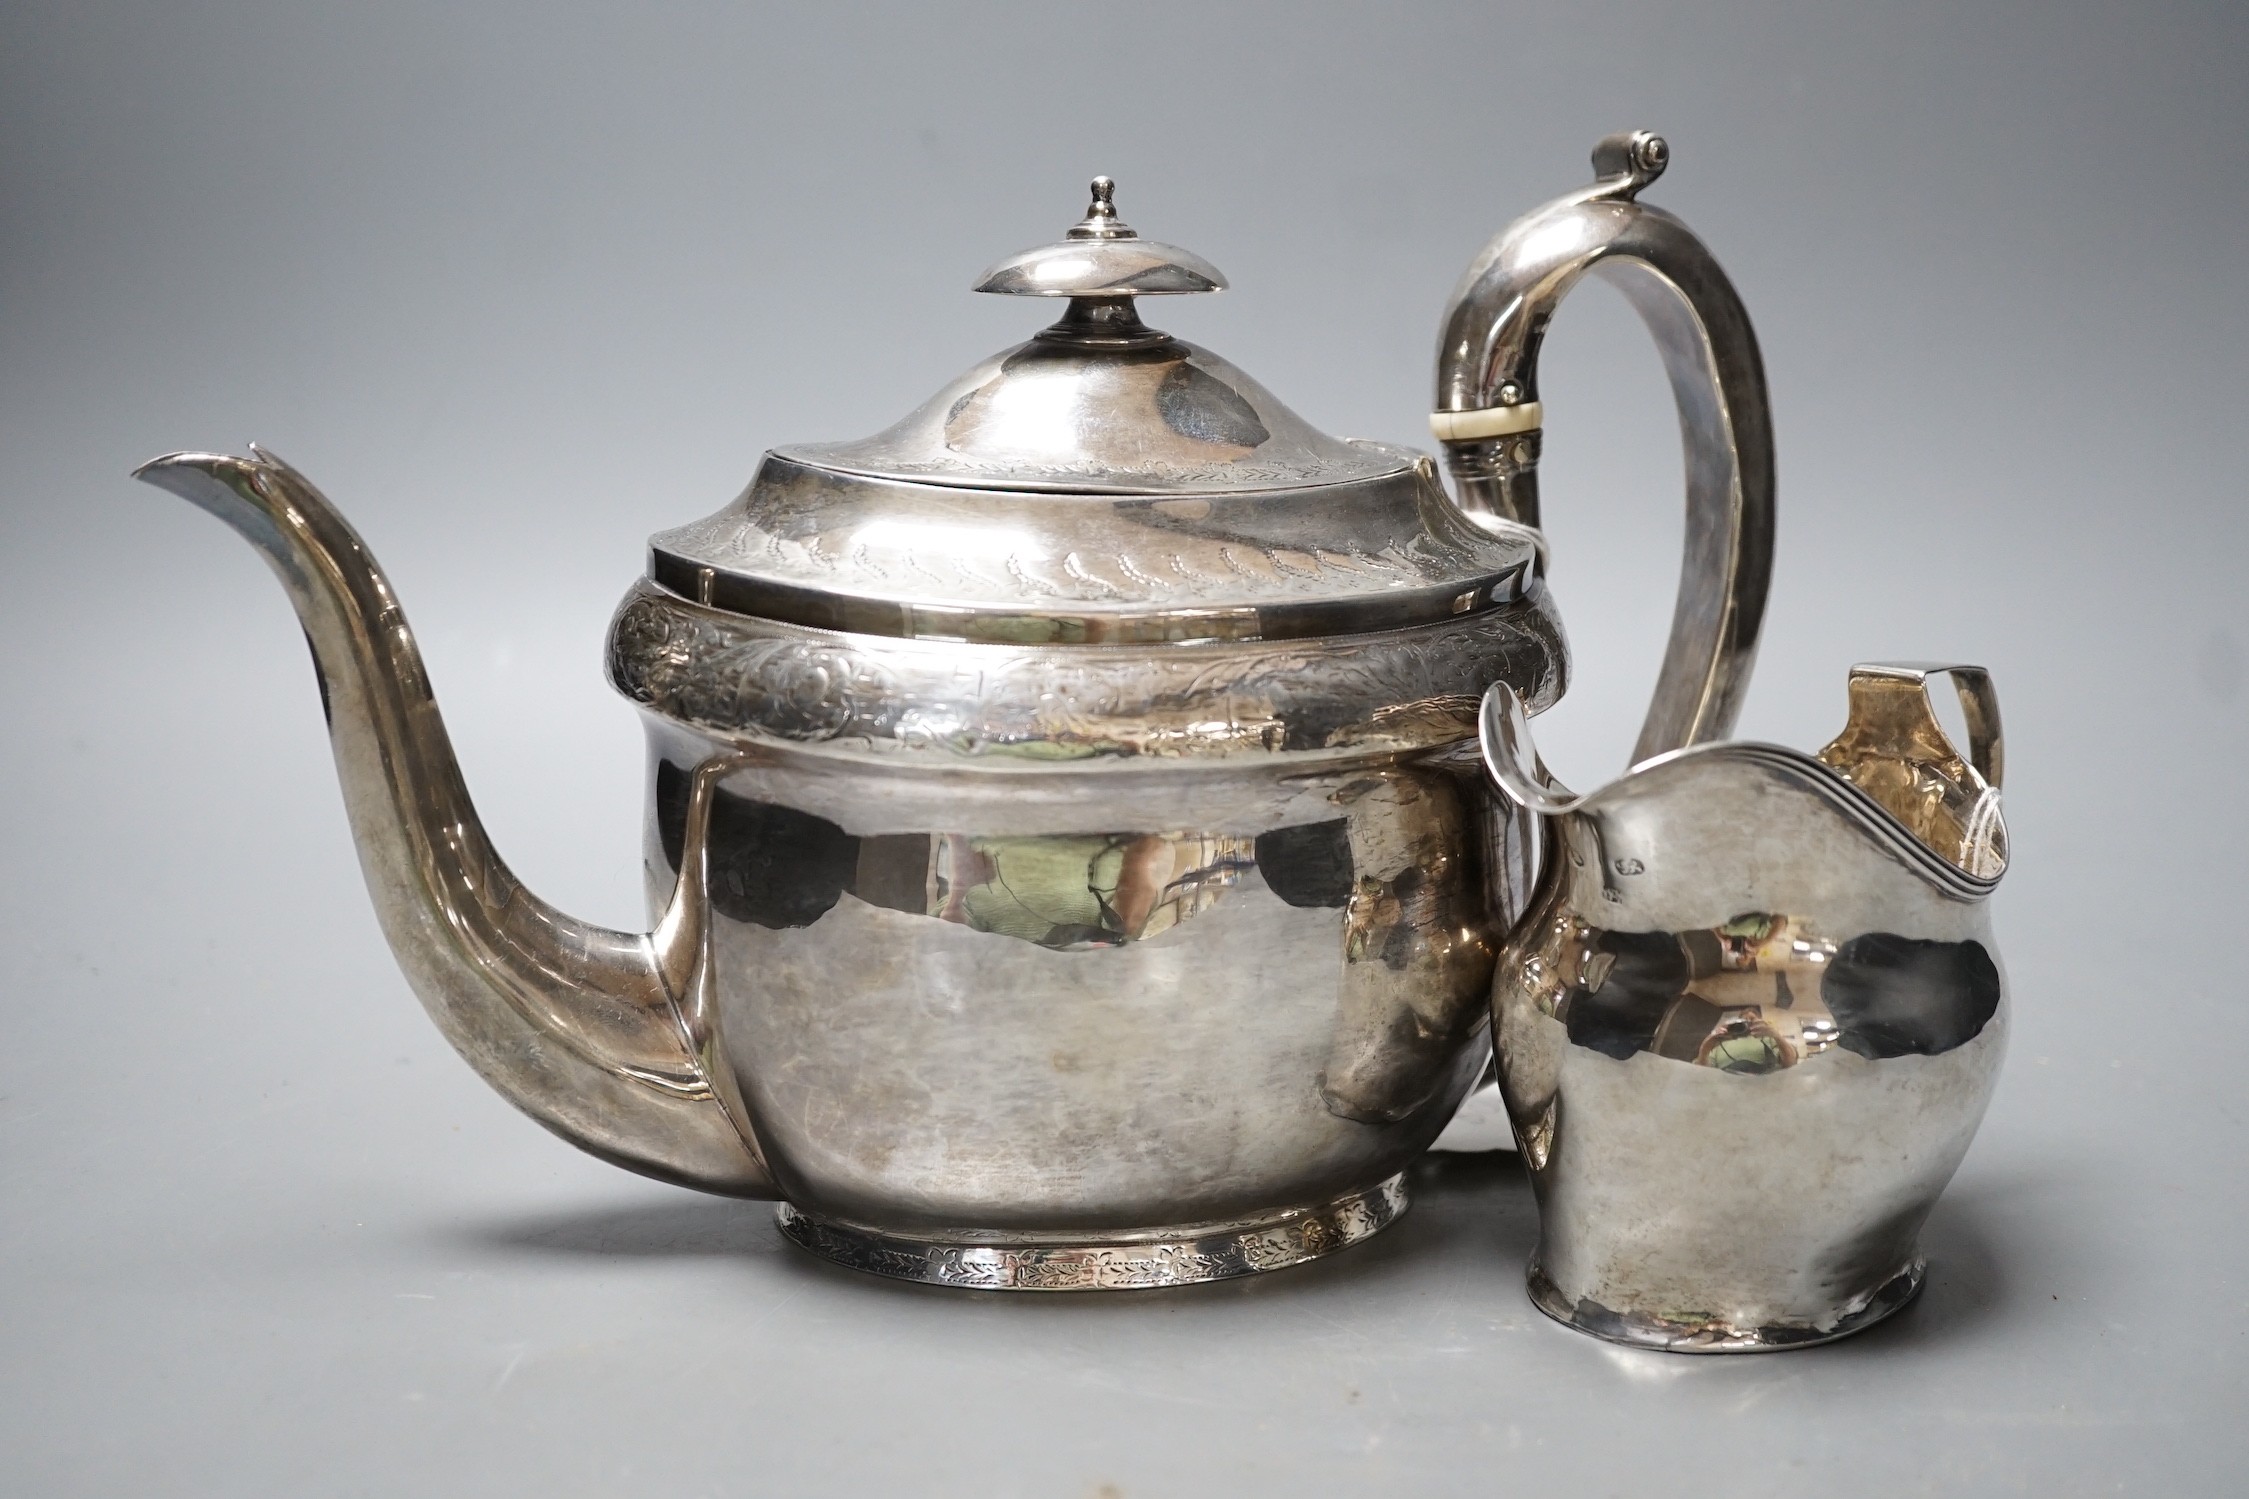 A George III engraved silver oval teapot on stand, Hannah Northcote? London, 1804 and Georgian silver cream jug, marks rubbed, gross 24.8oz.